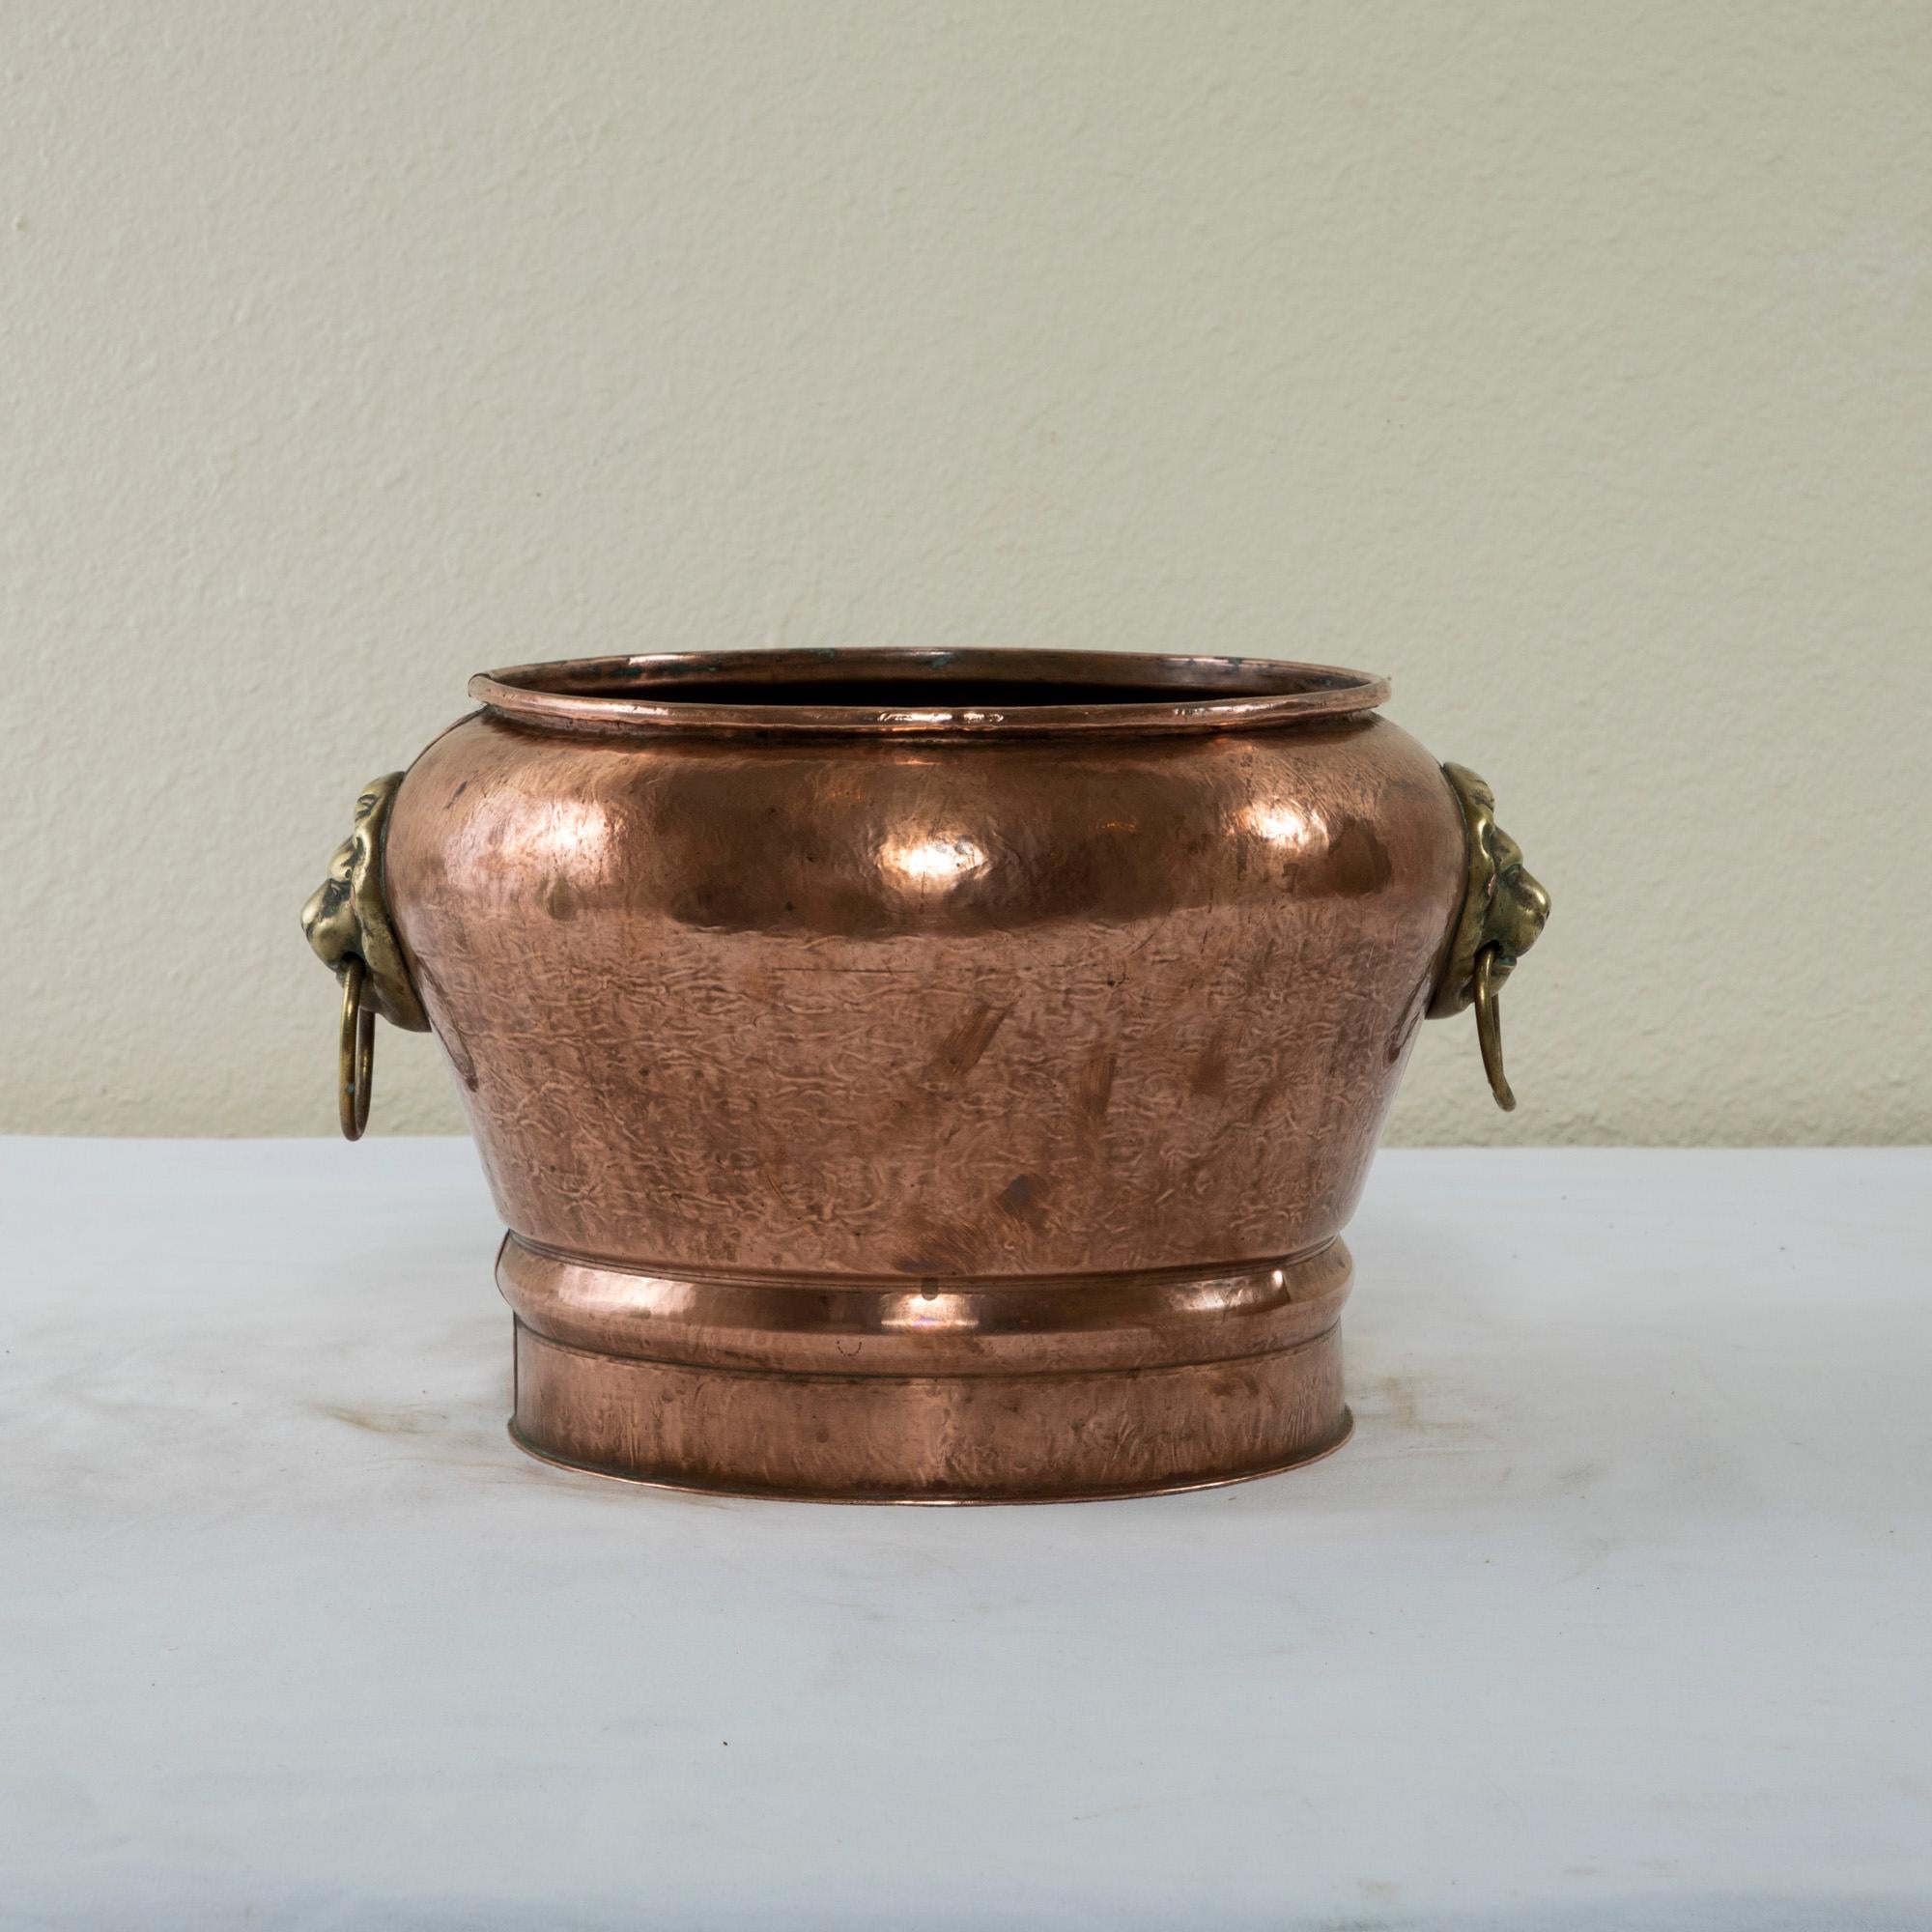 This French hand hammered copper cachepot of planter is from the turn of the twentieth century. It features a bronze lion head on each side with a drop ring handle in its mouth. The cachepot measures 8.75 inches in height by 13 inches in diameter,